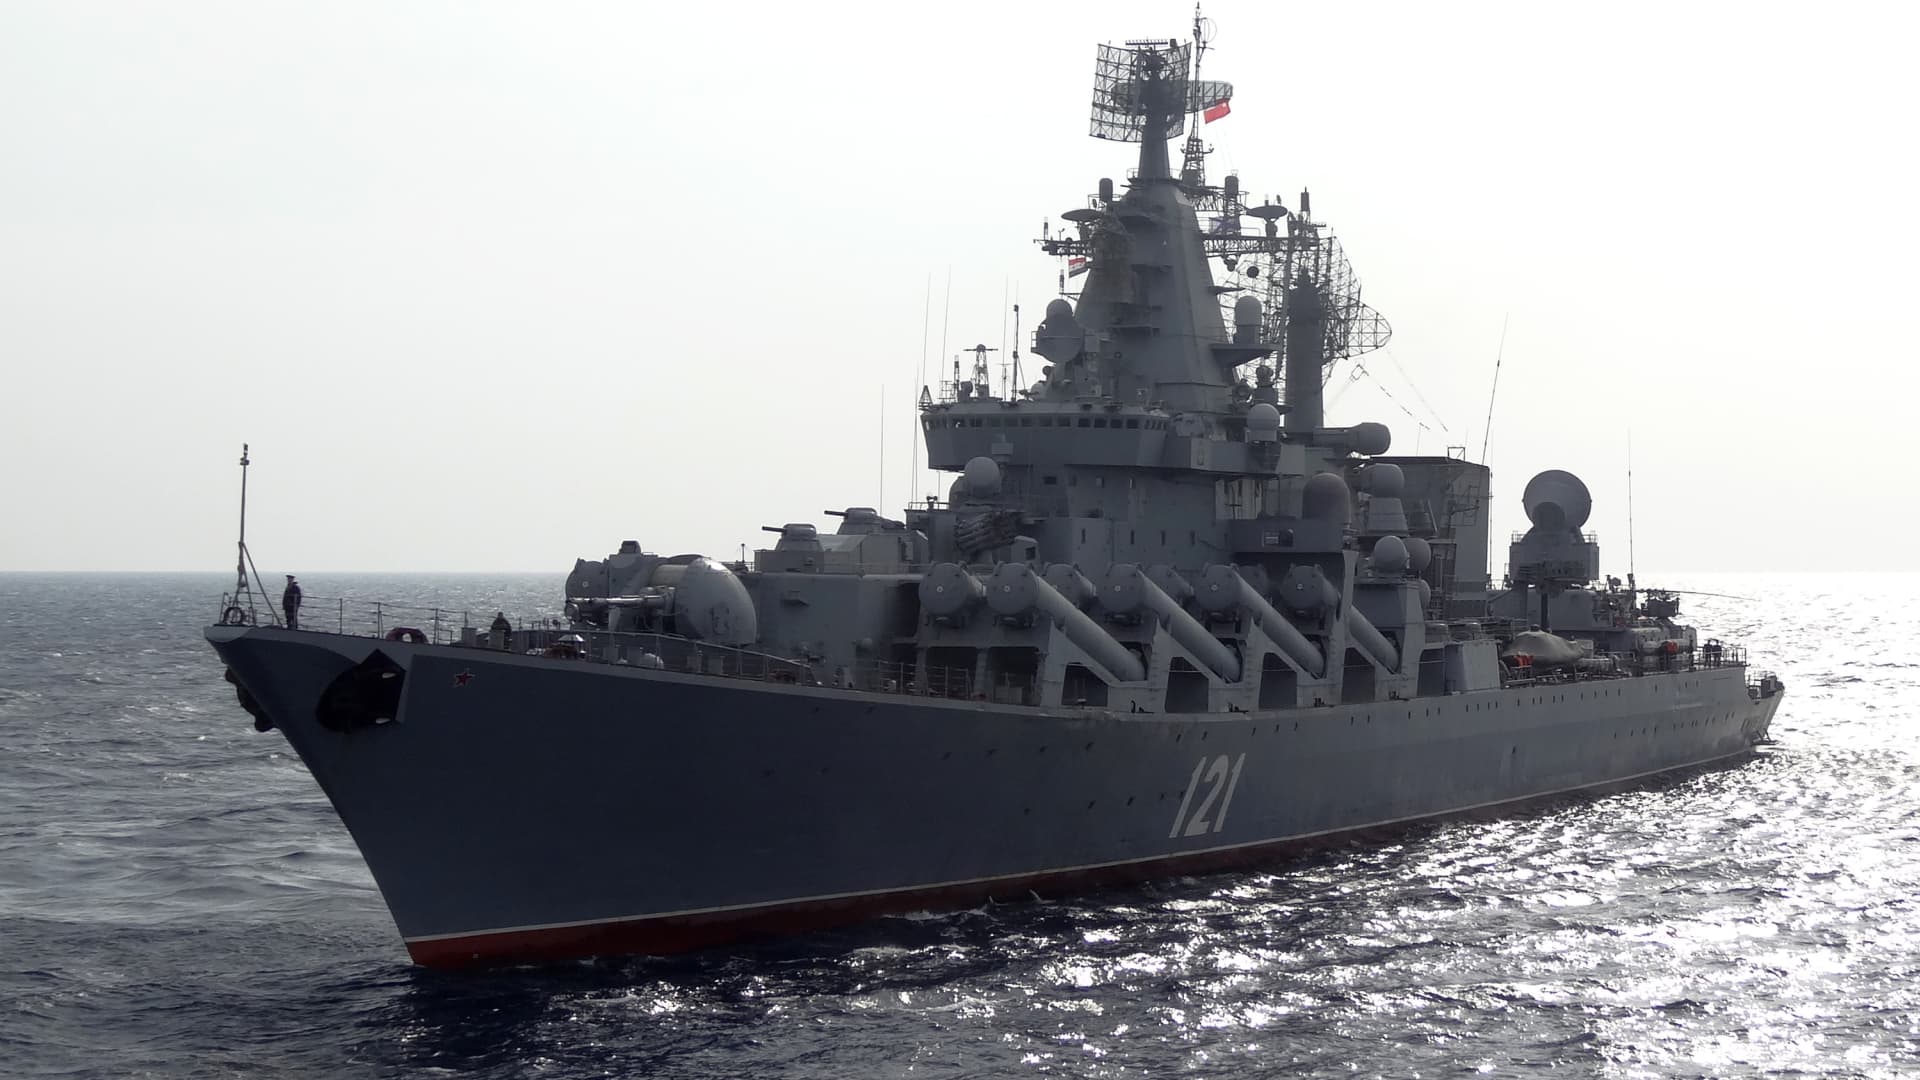 Russian sailors evacuate warship in the Black Sea after Ukraine attack; U.S. will send another $800 million in weapons to Ukraine – CNBC